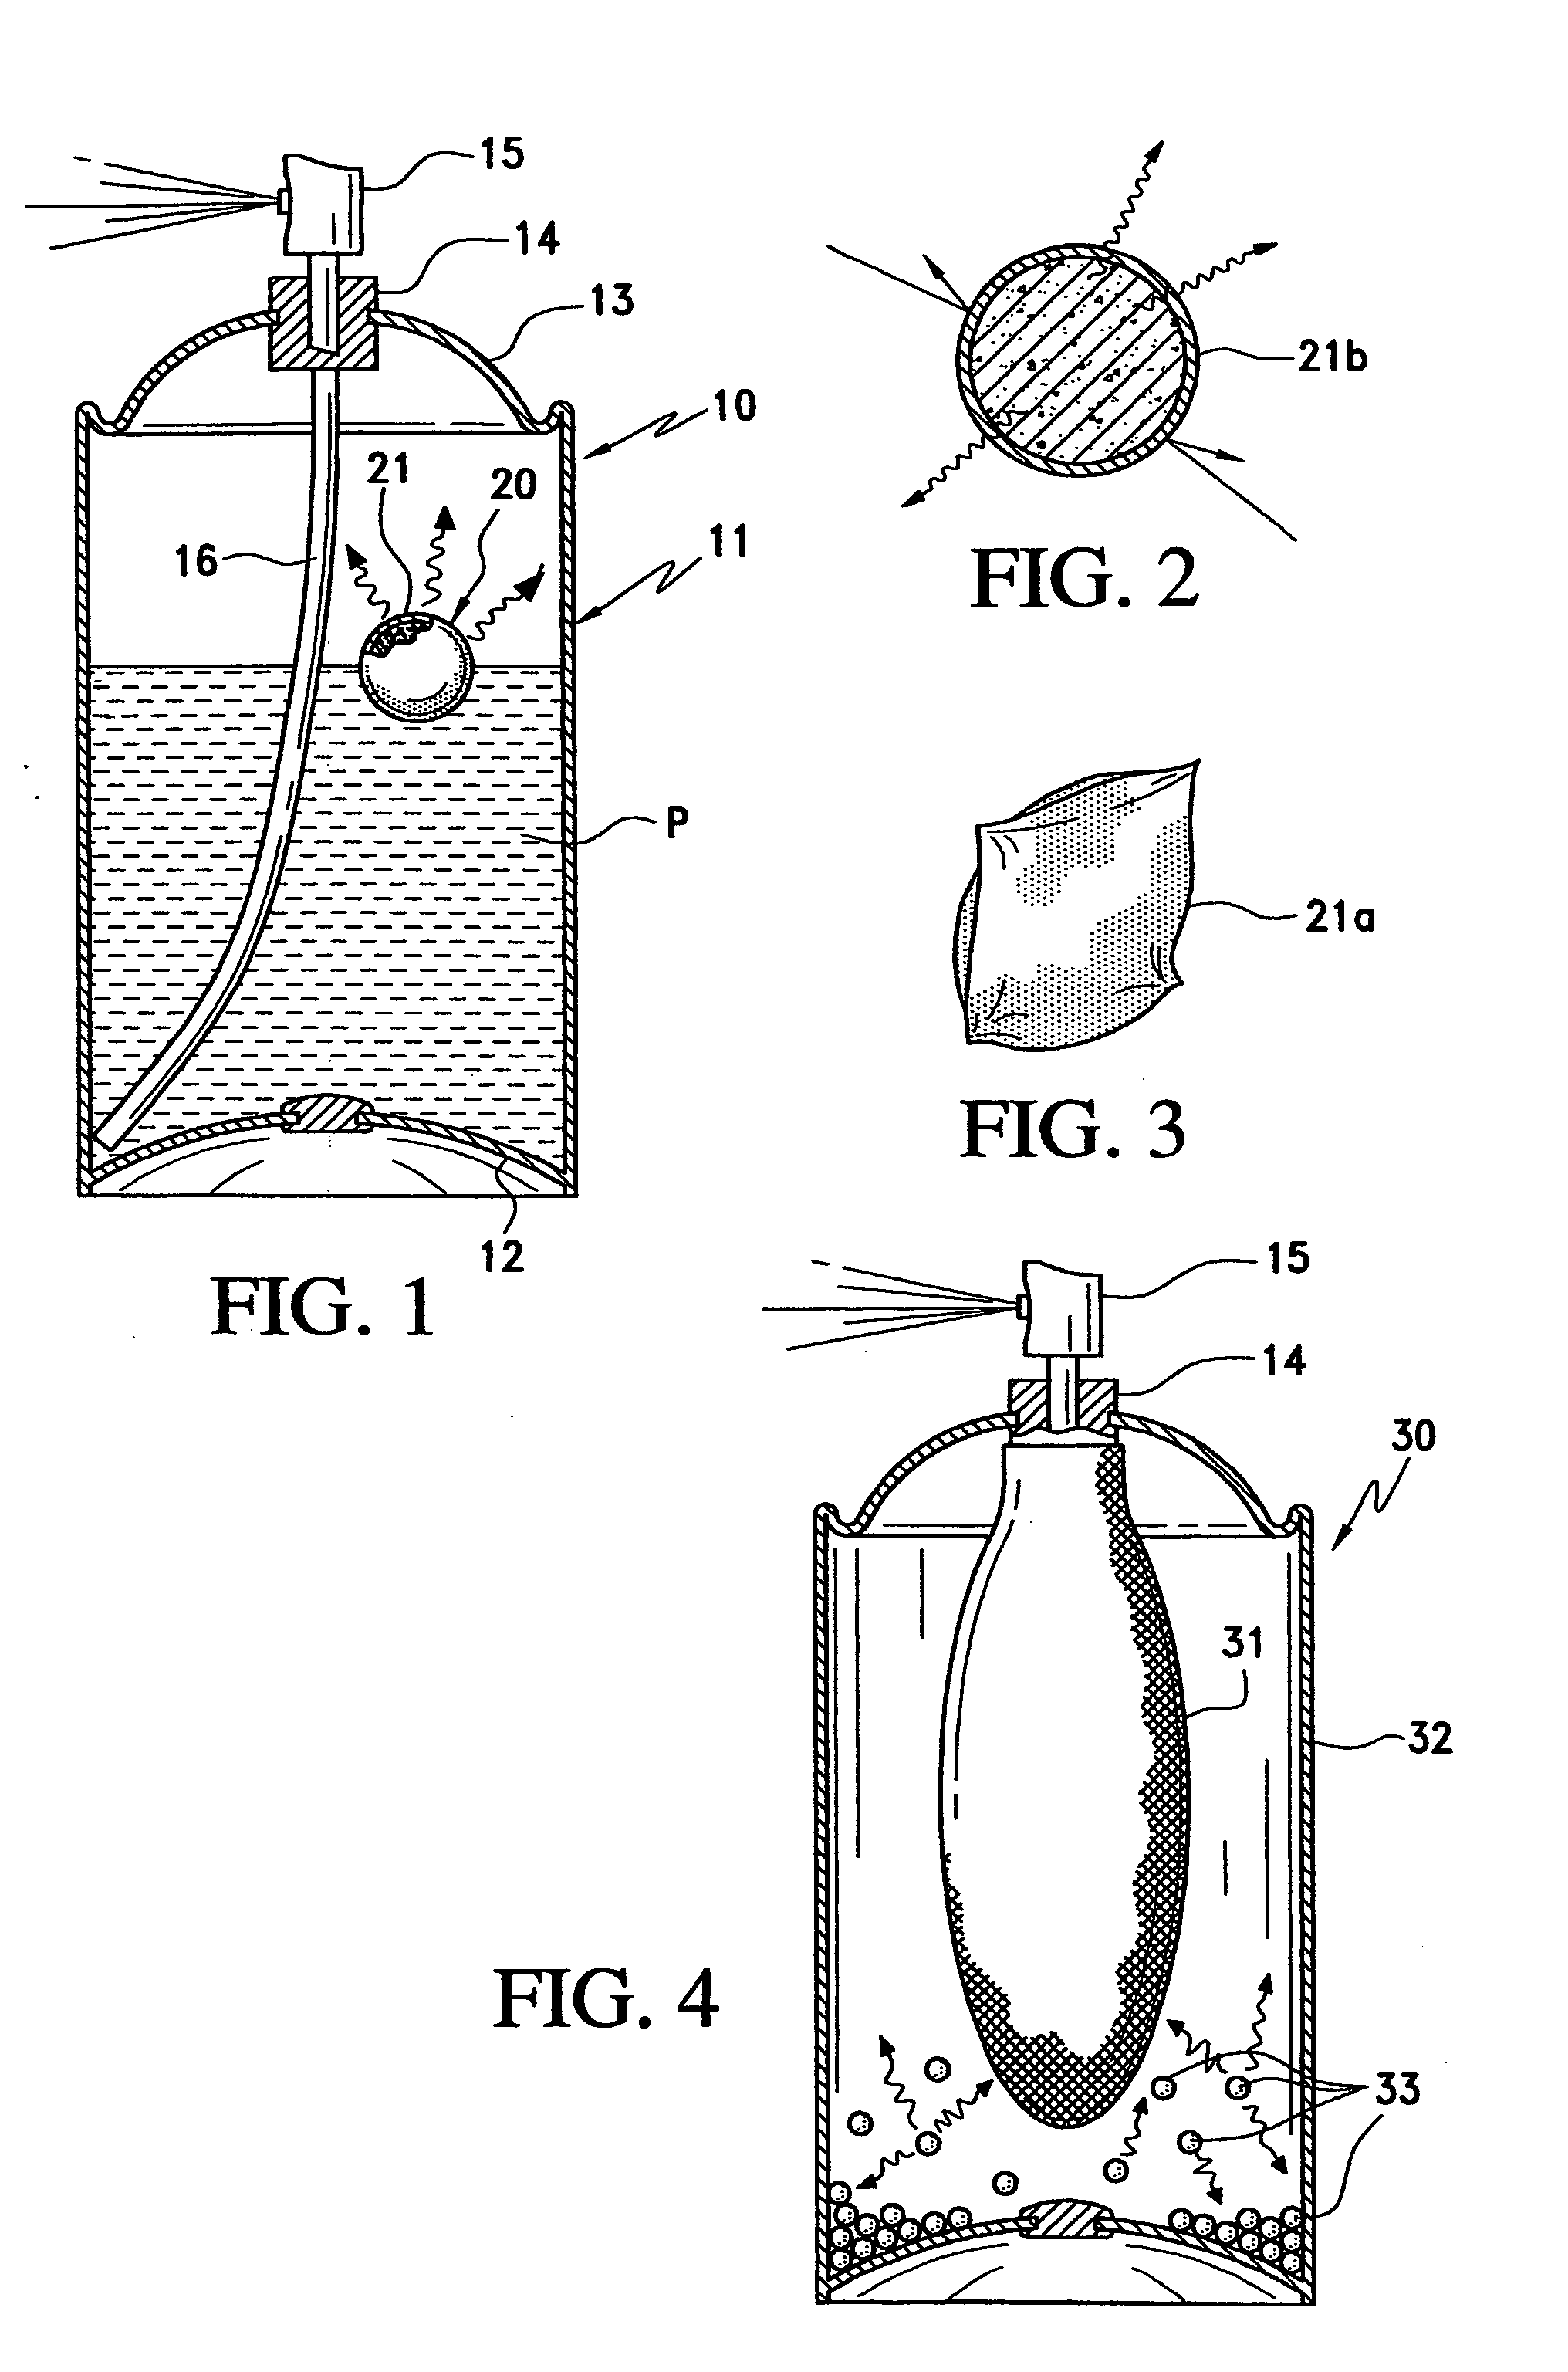 Gas storage and delivery system for pressurized containers